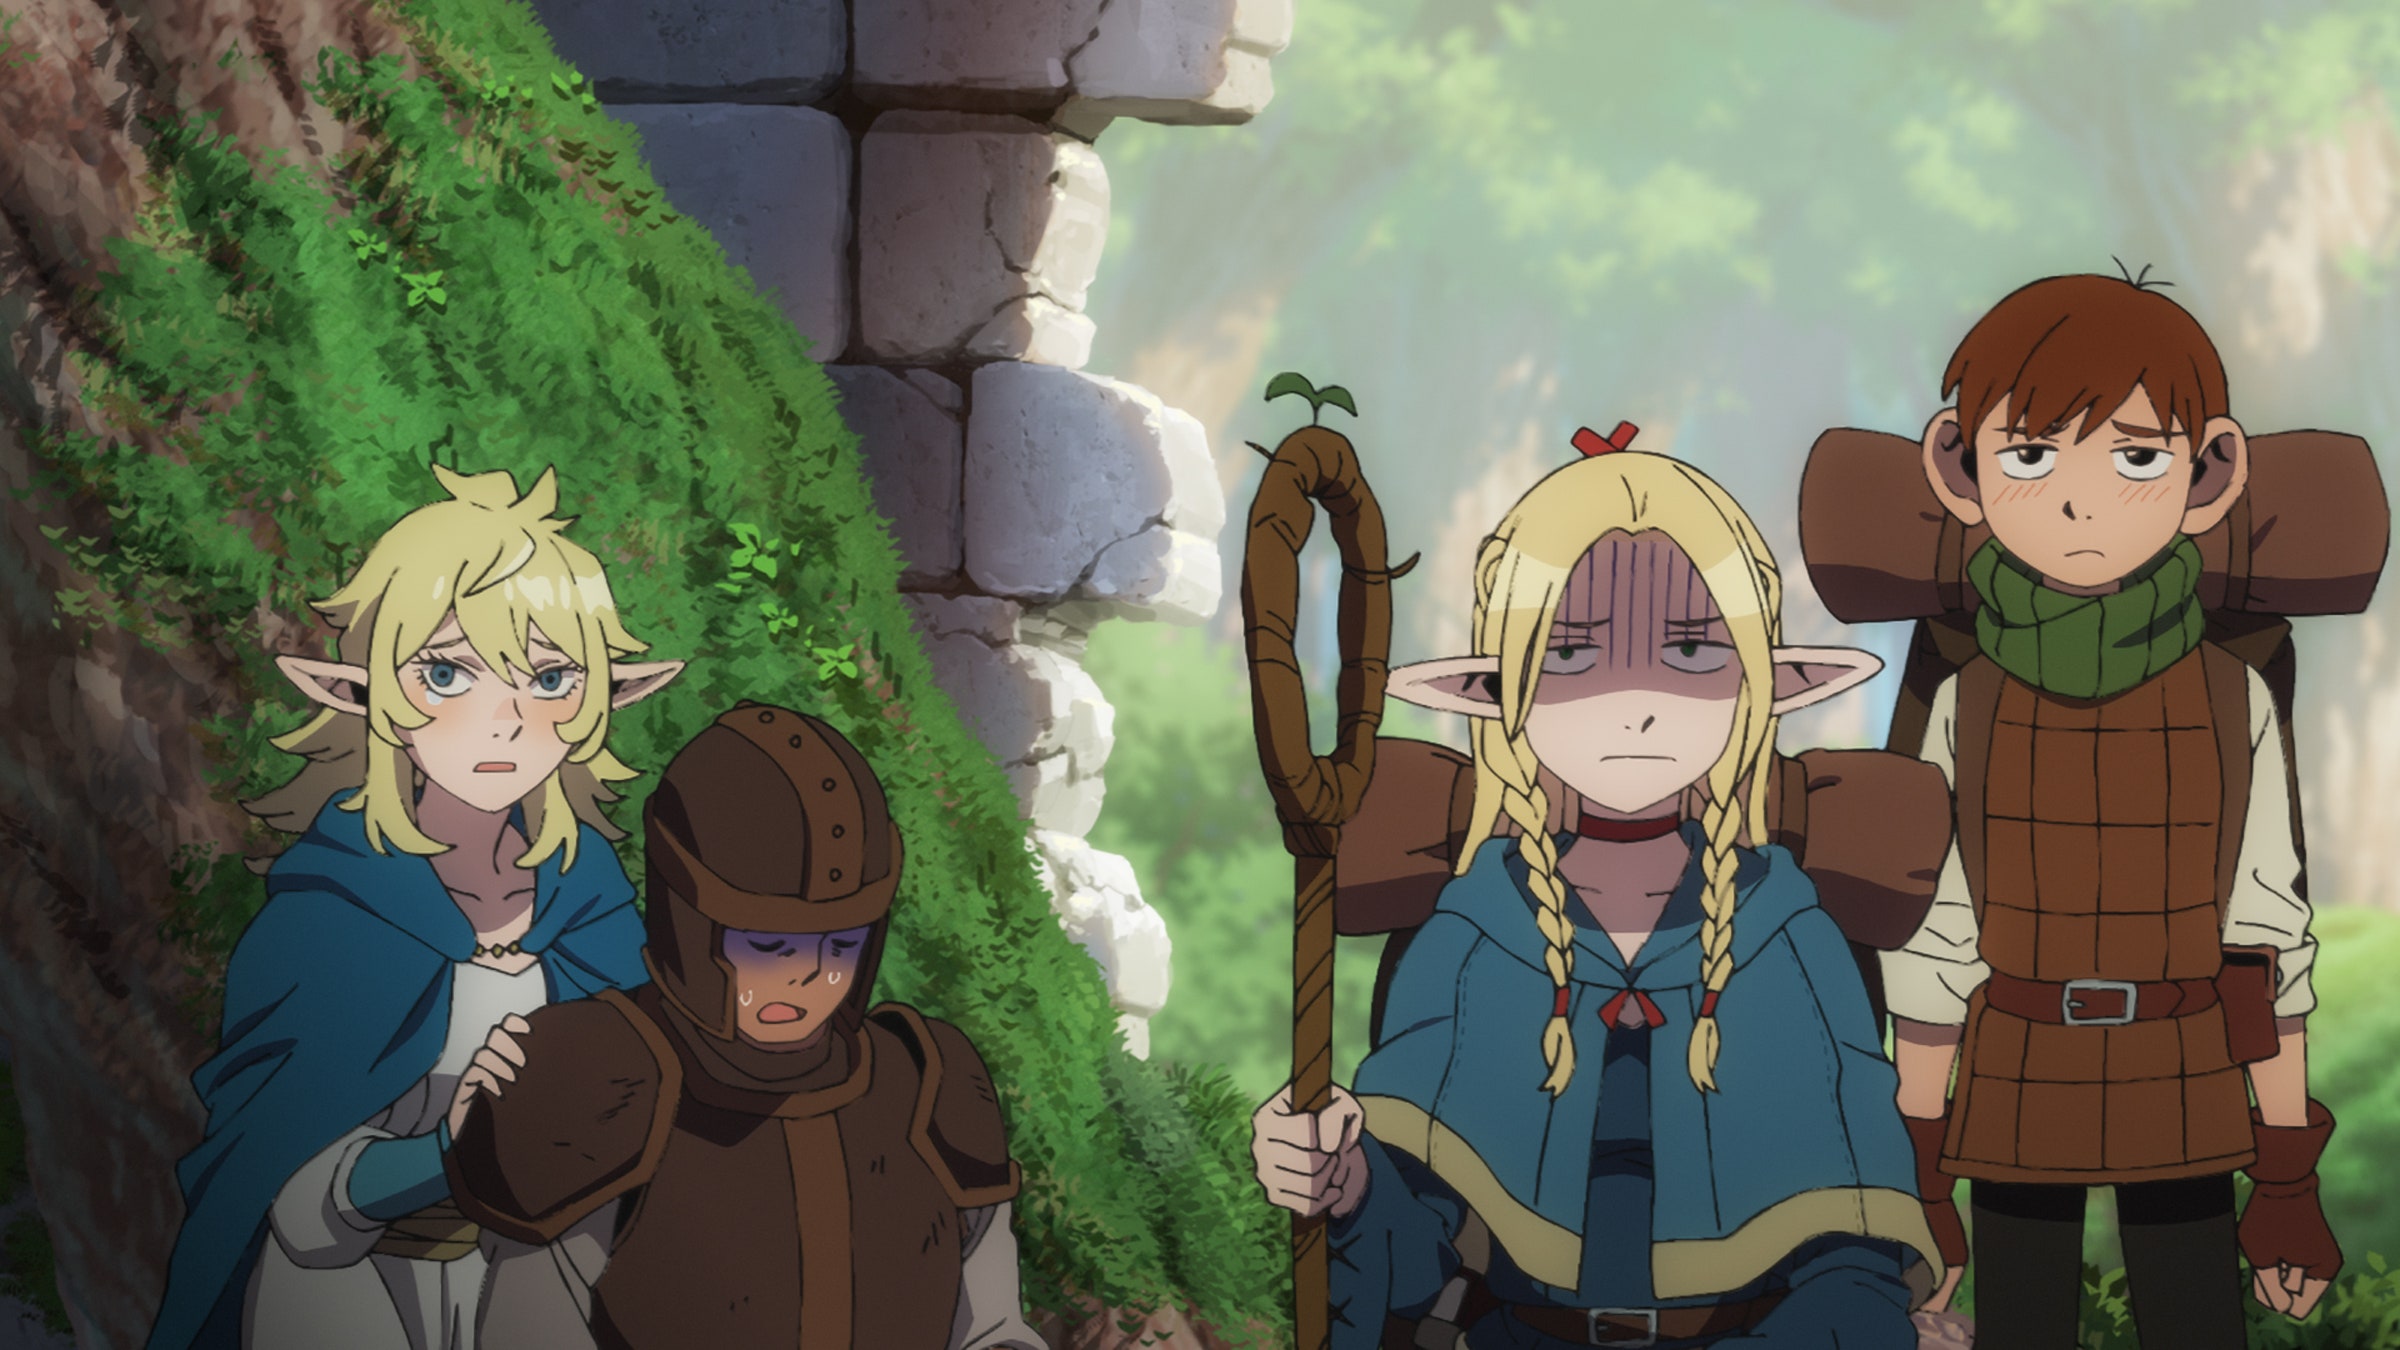 An image of some of the main characters from the Netflix anime series Delicious in the Dungeon where they seem reluctant...